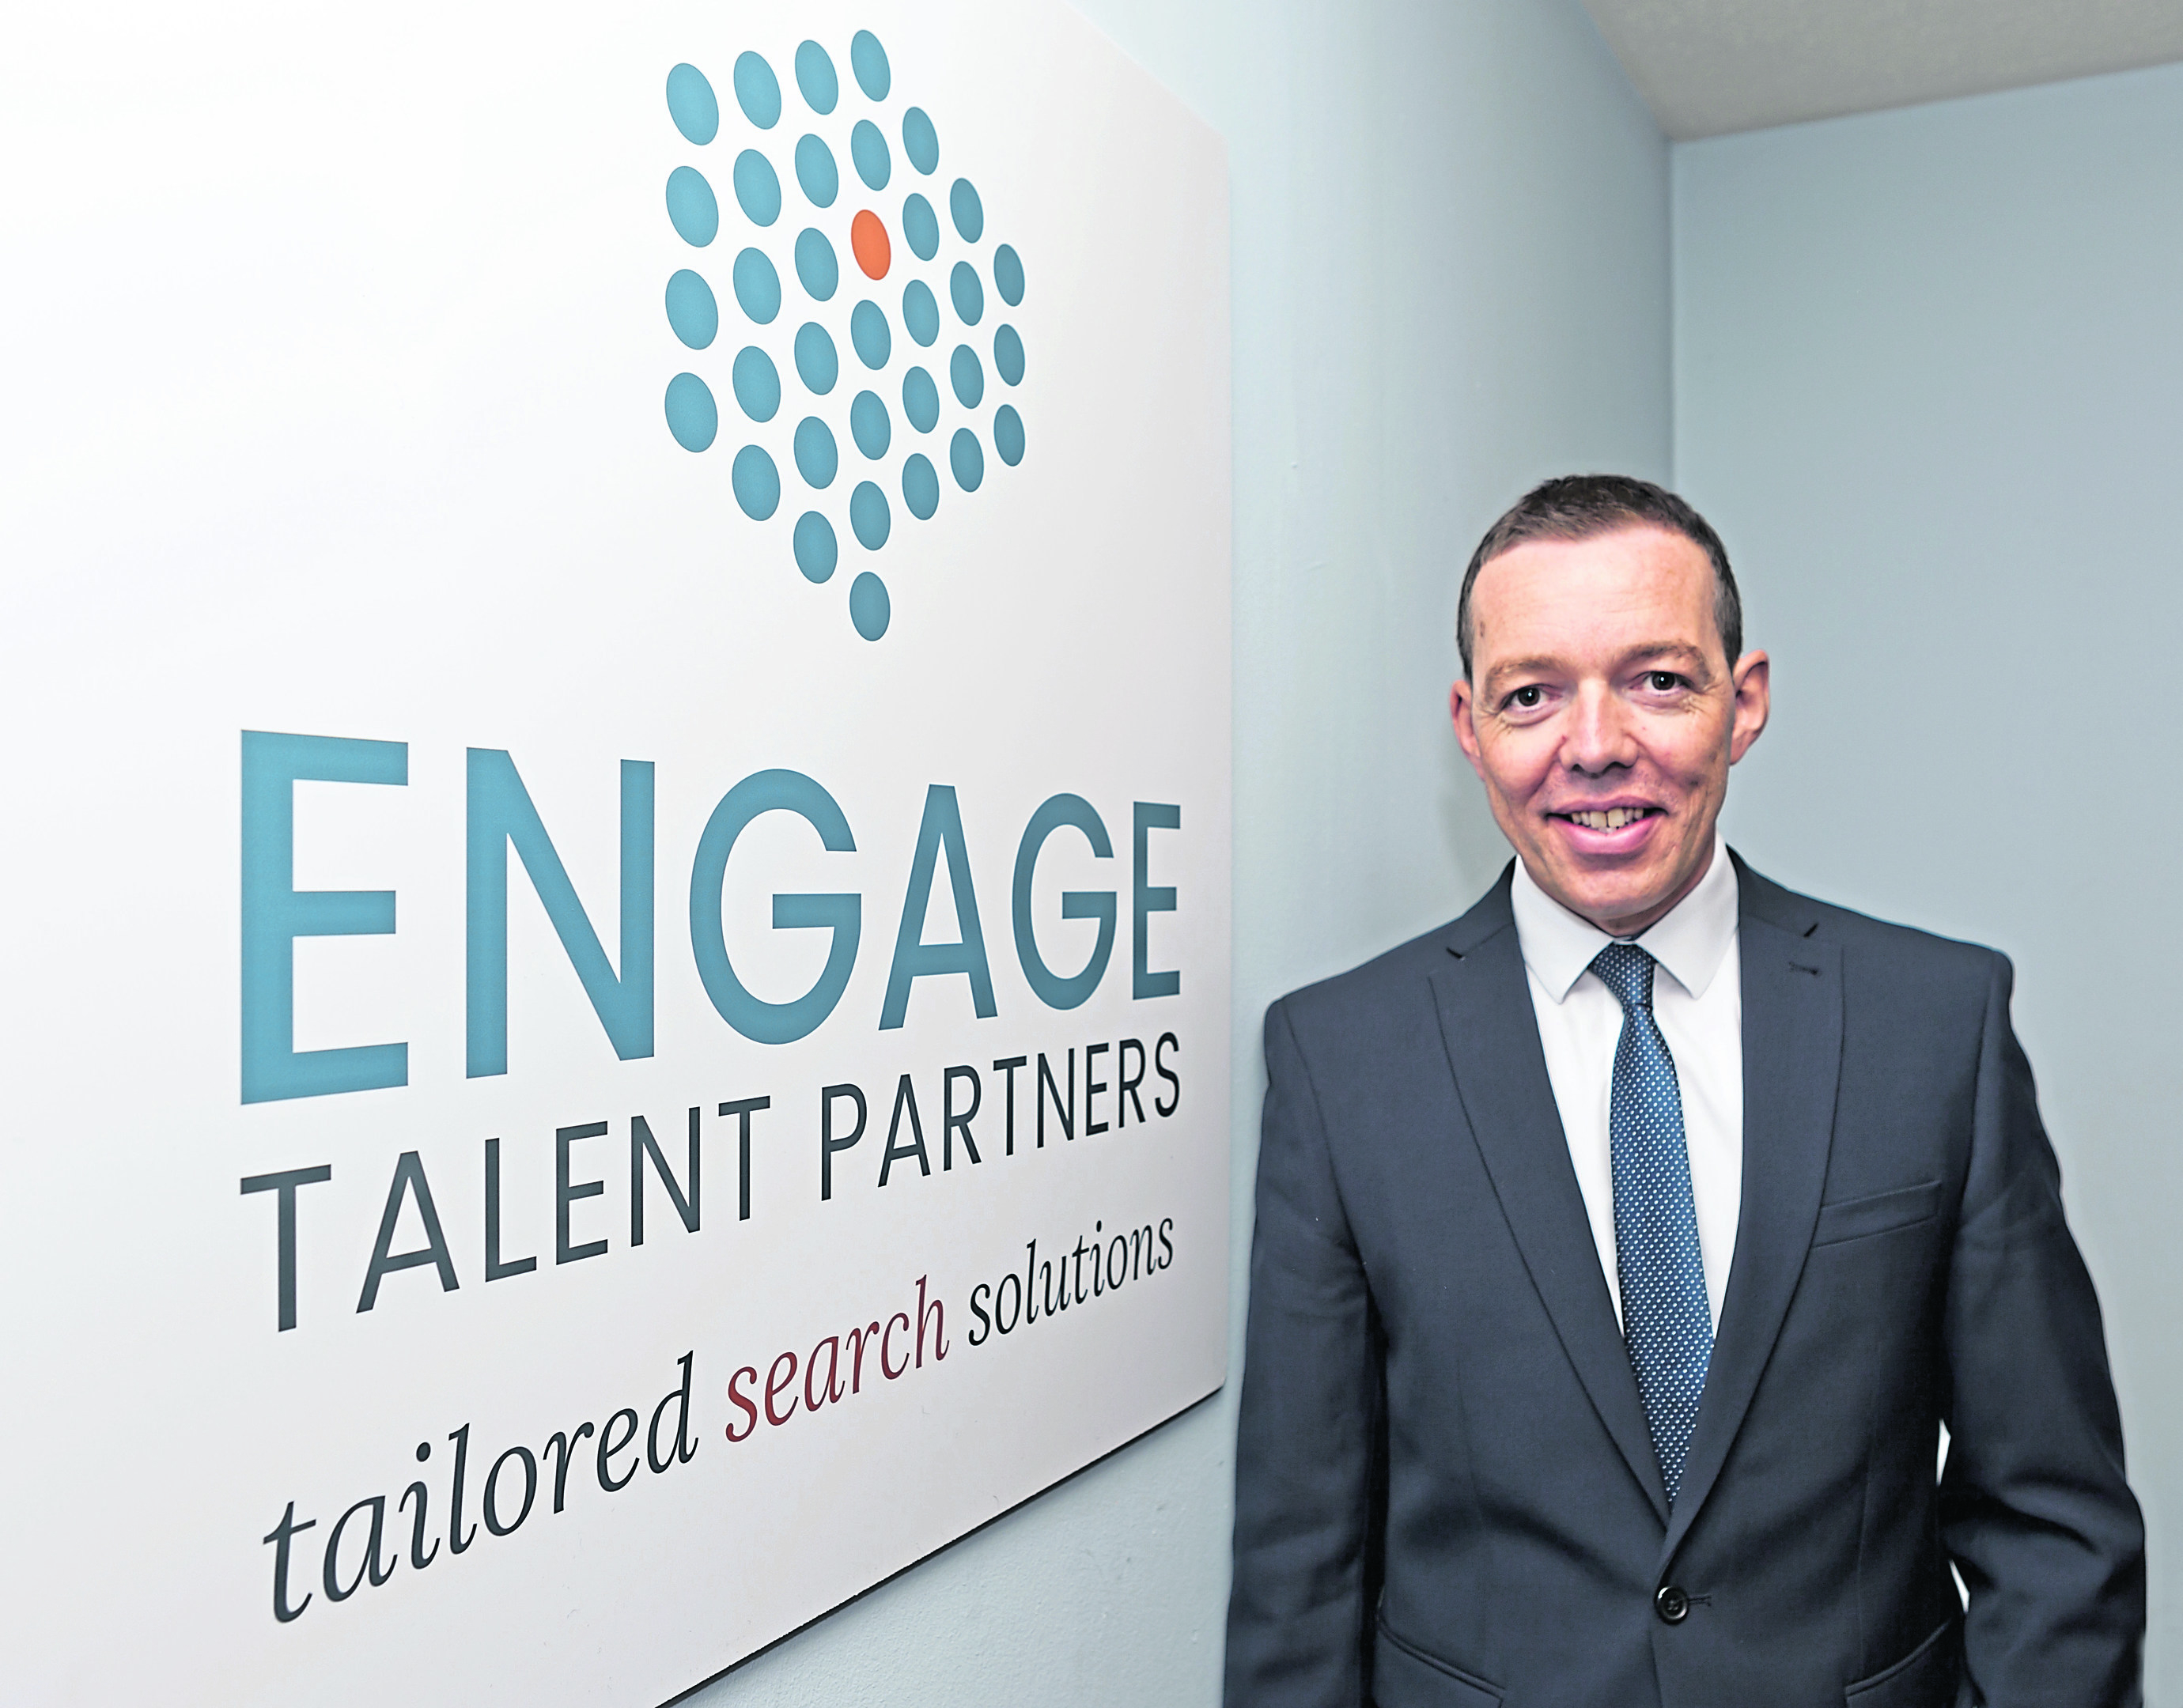 Scott Leonard, founder and recruitment director at Aberdeen-based Engage Talent Partners